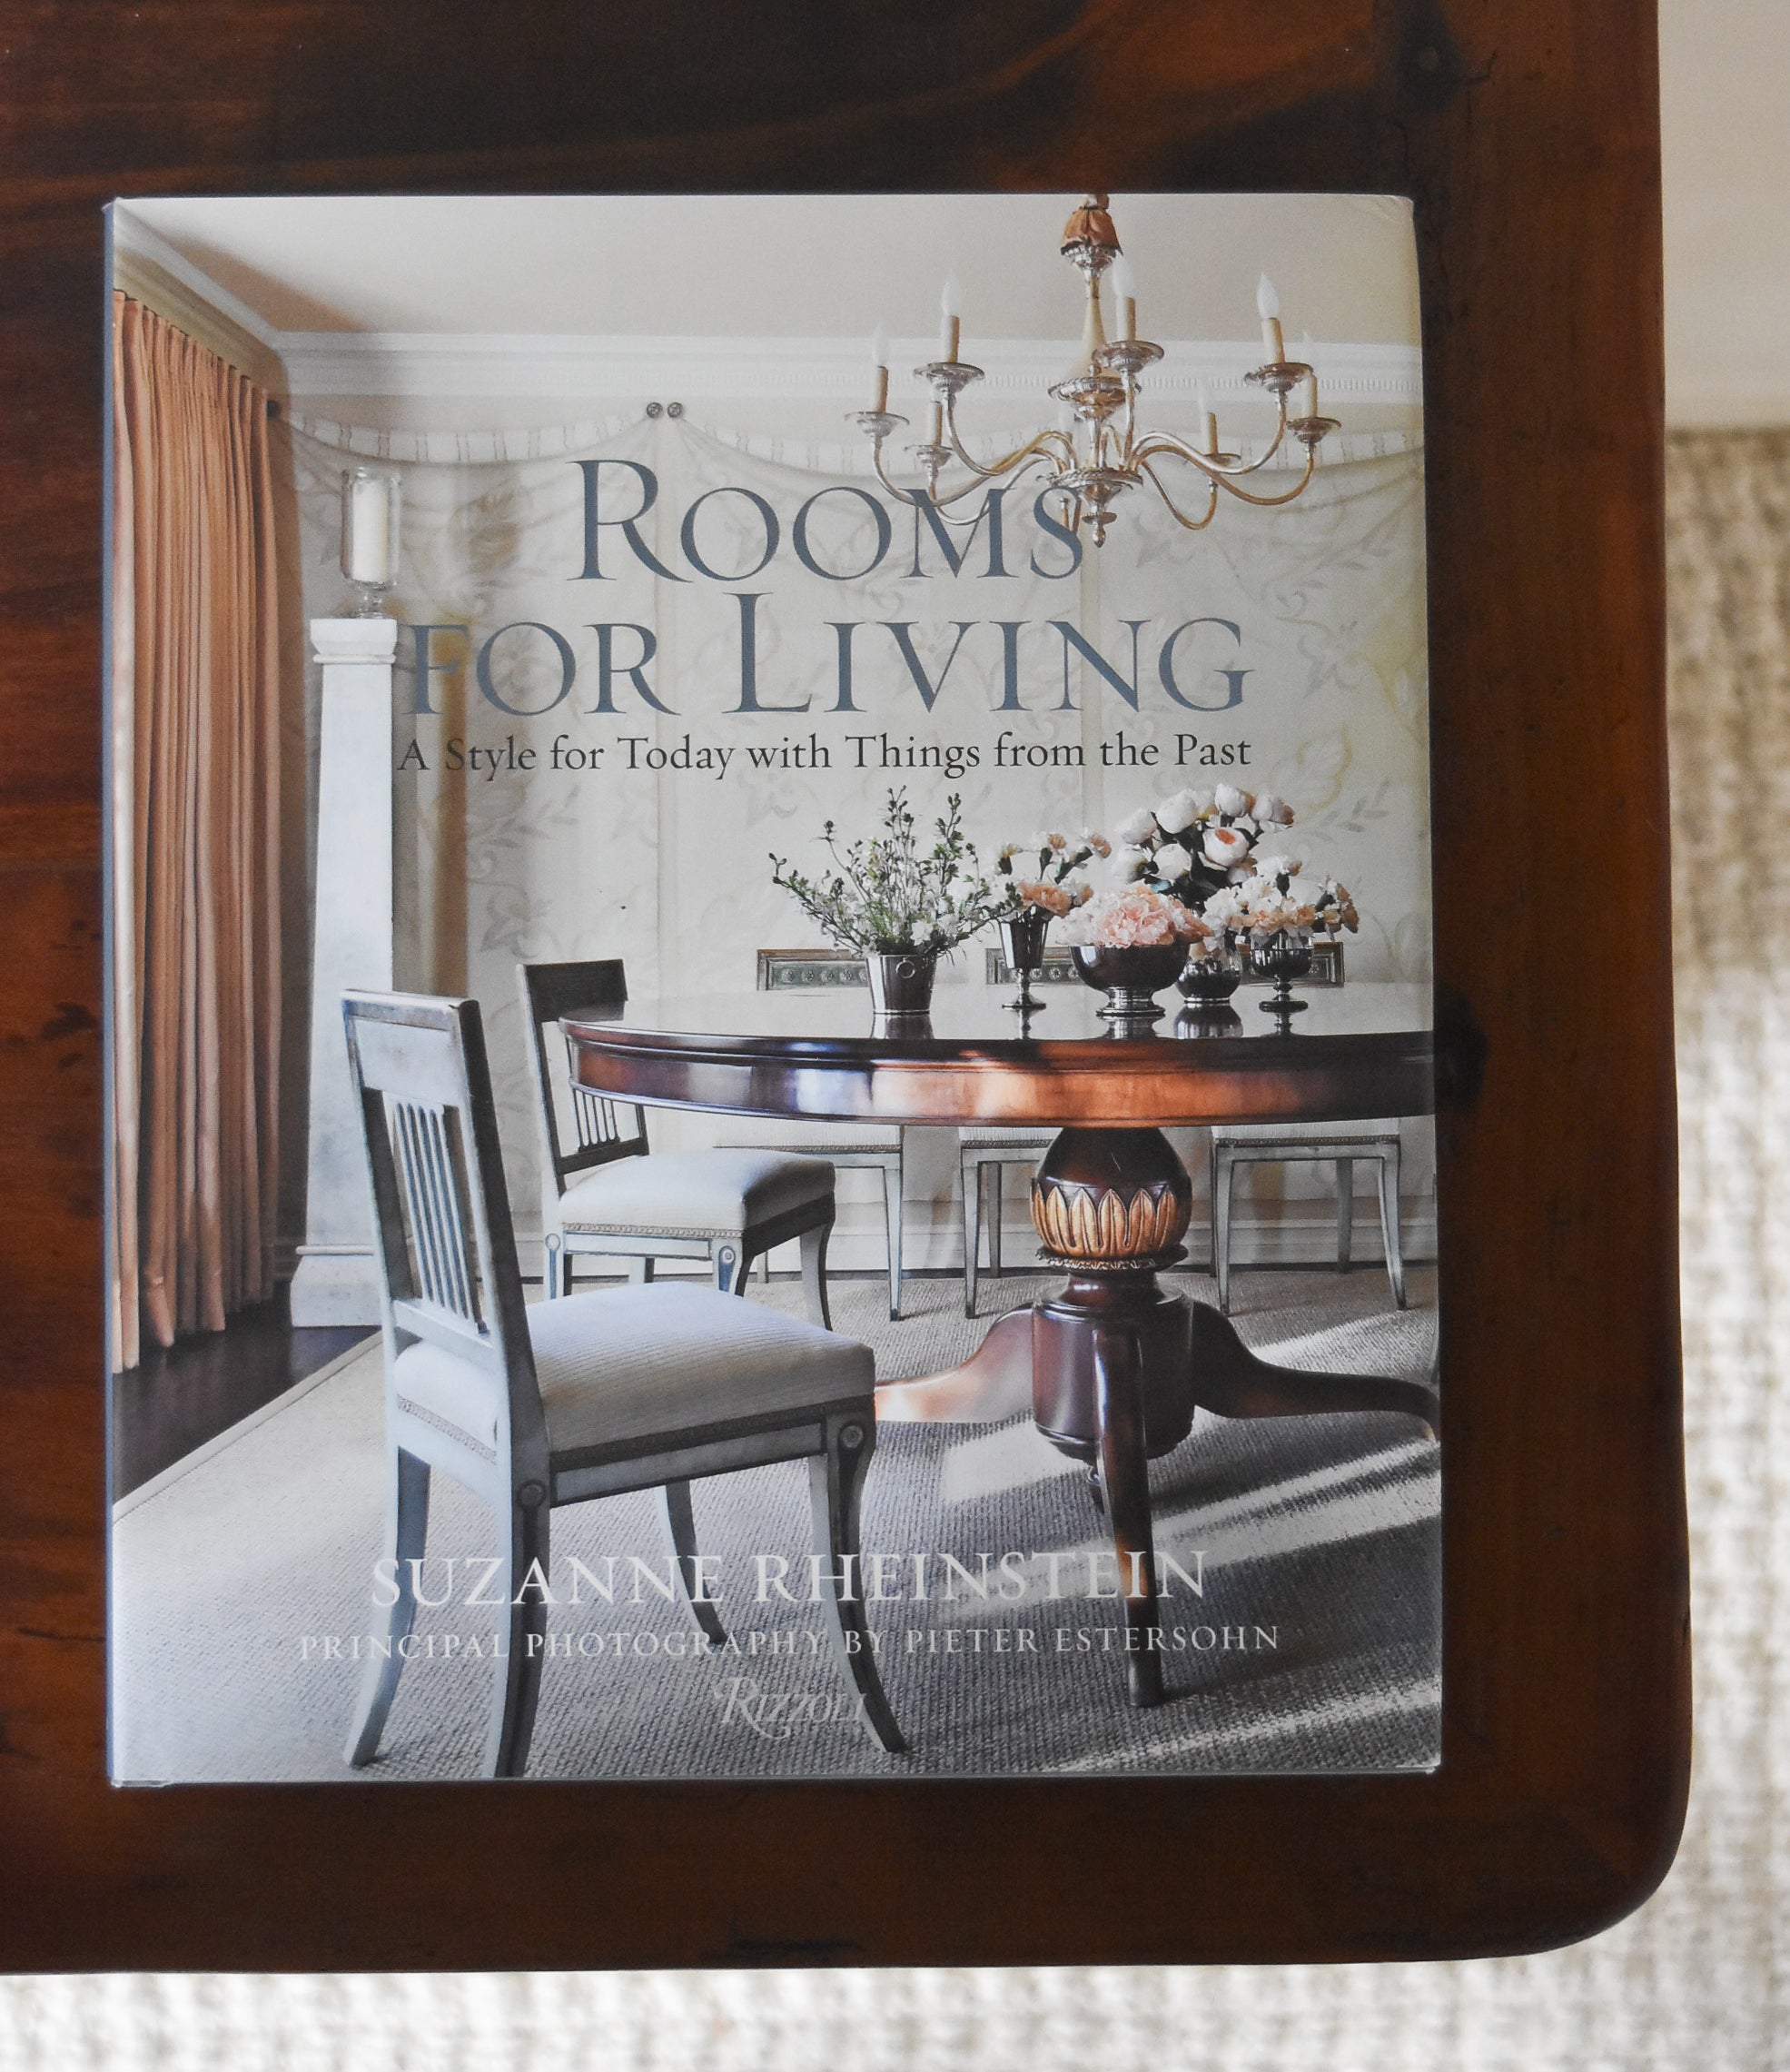 Rooms For Living by Suzanne Rheinstein